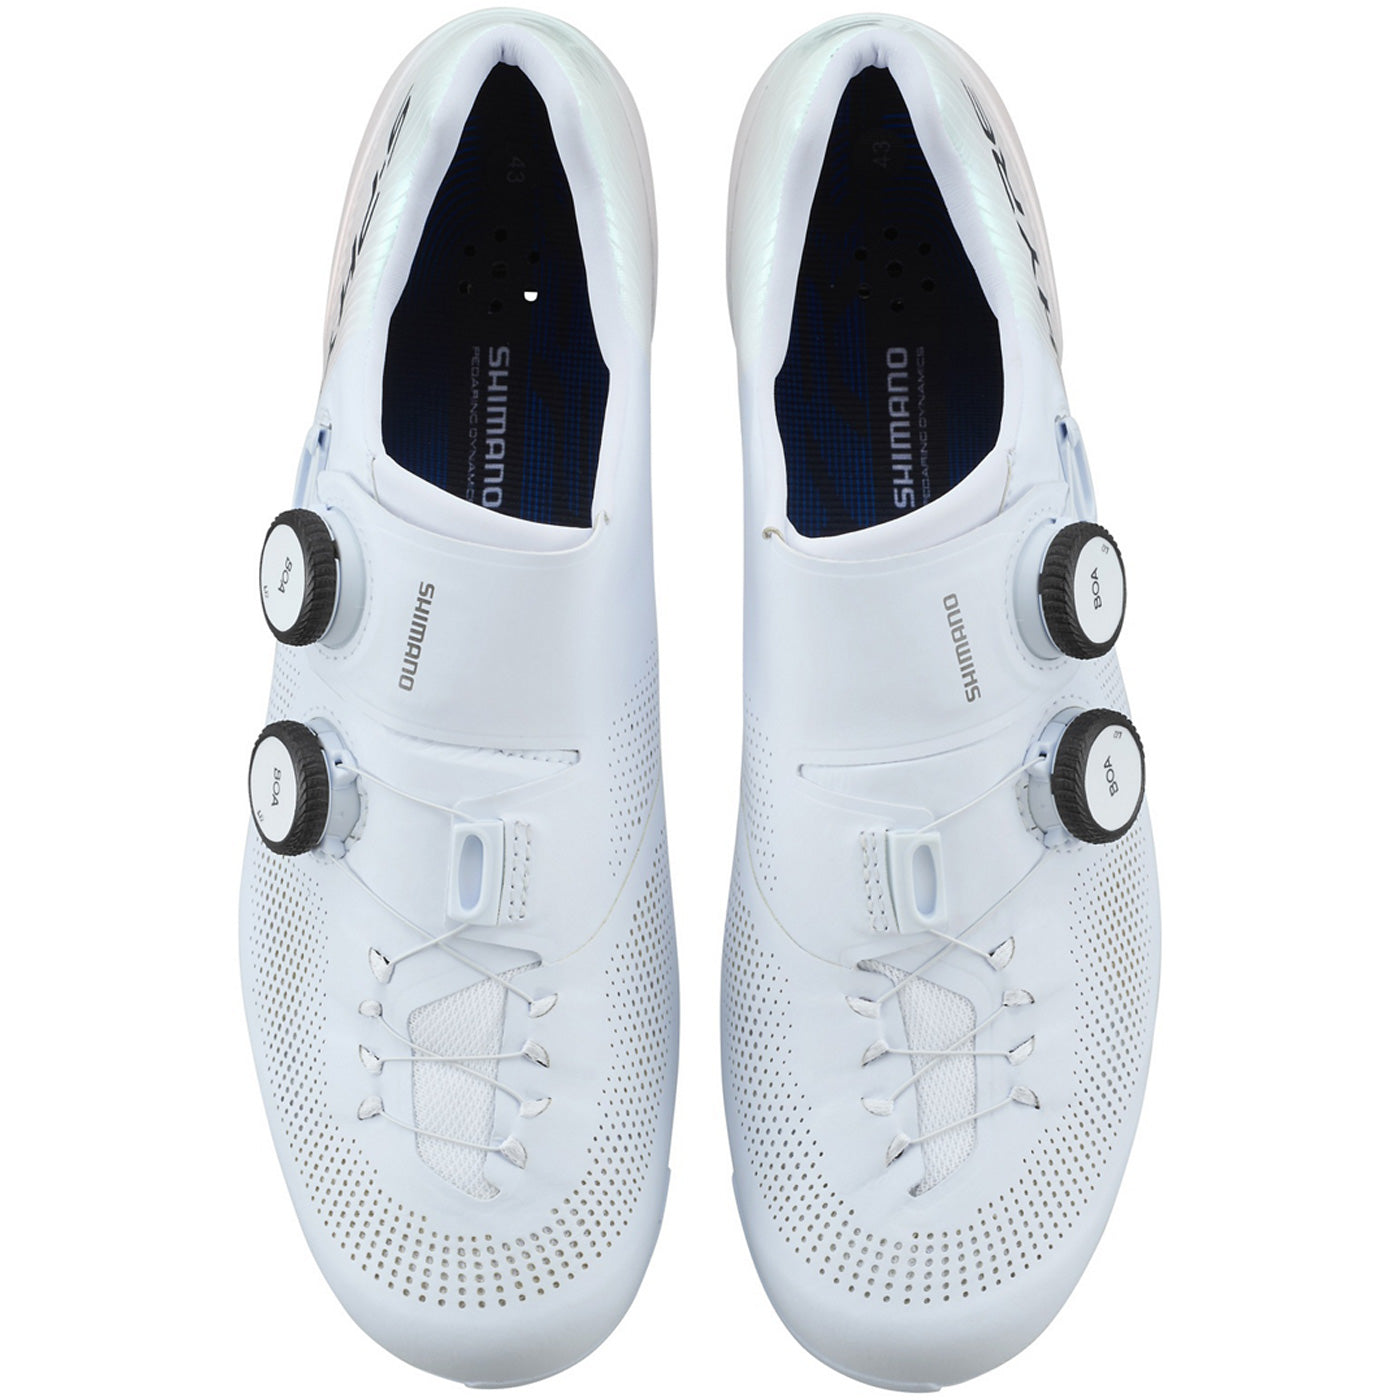 Chaussures Shimano S-Phyre RC903 - Blanc